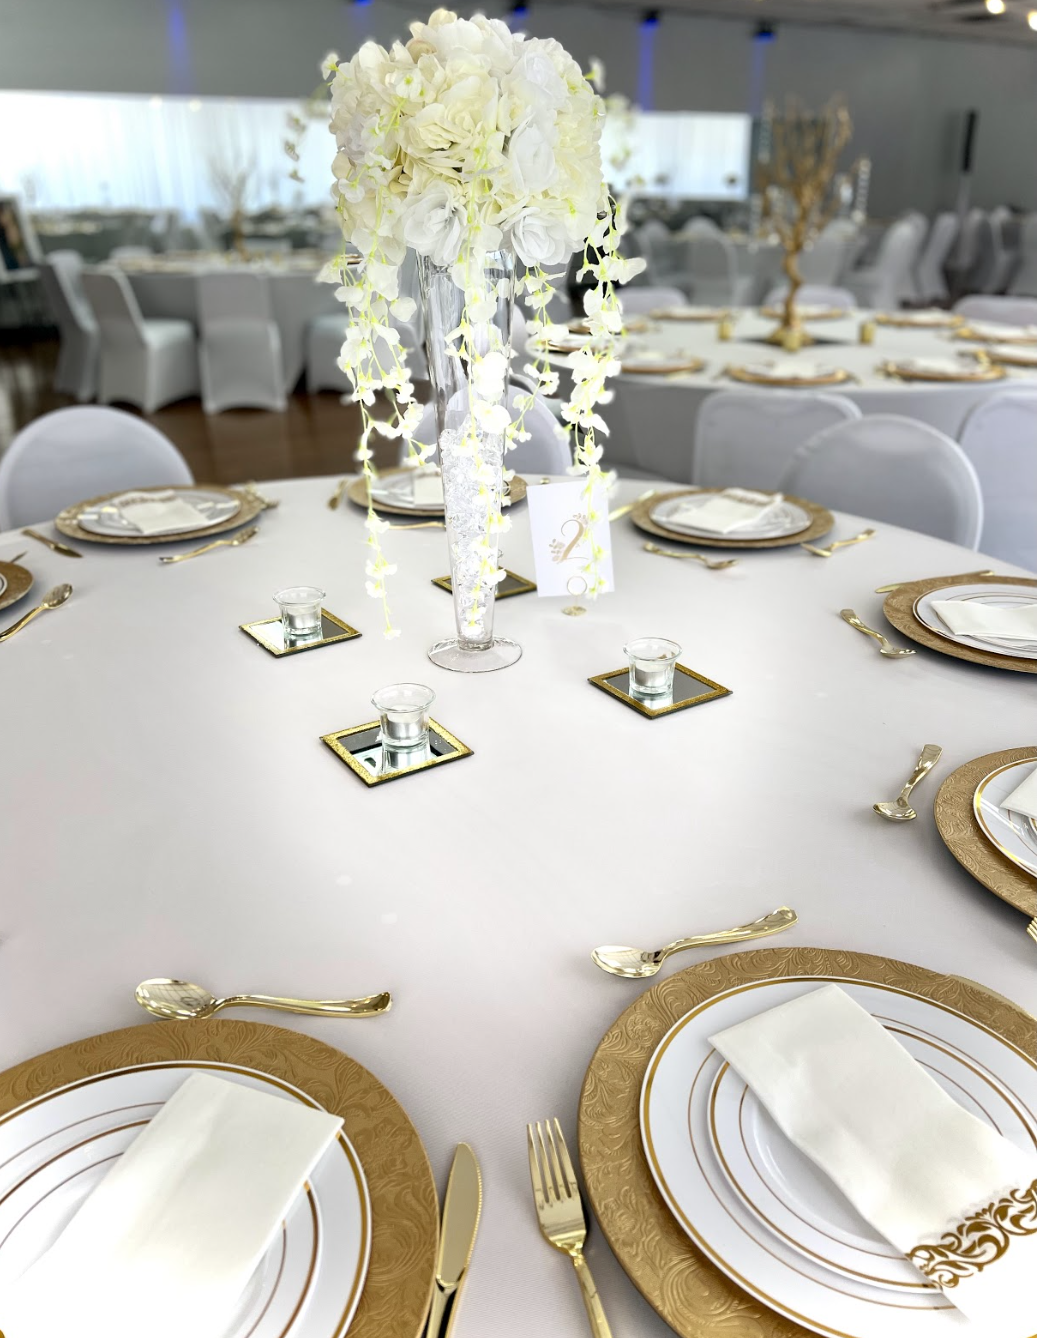 Exquisite wedding reception guest table with a stunning white floral centerpiece - Enhancing the elegance and beauty of the celebration